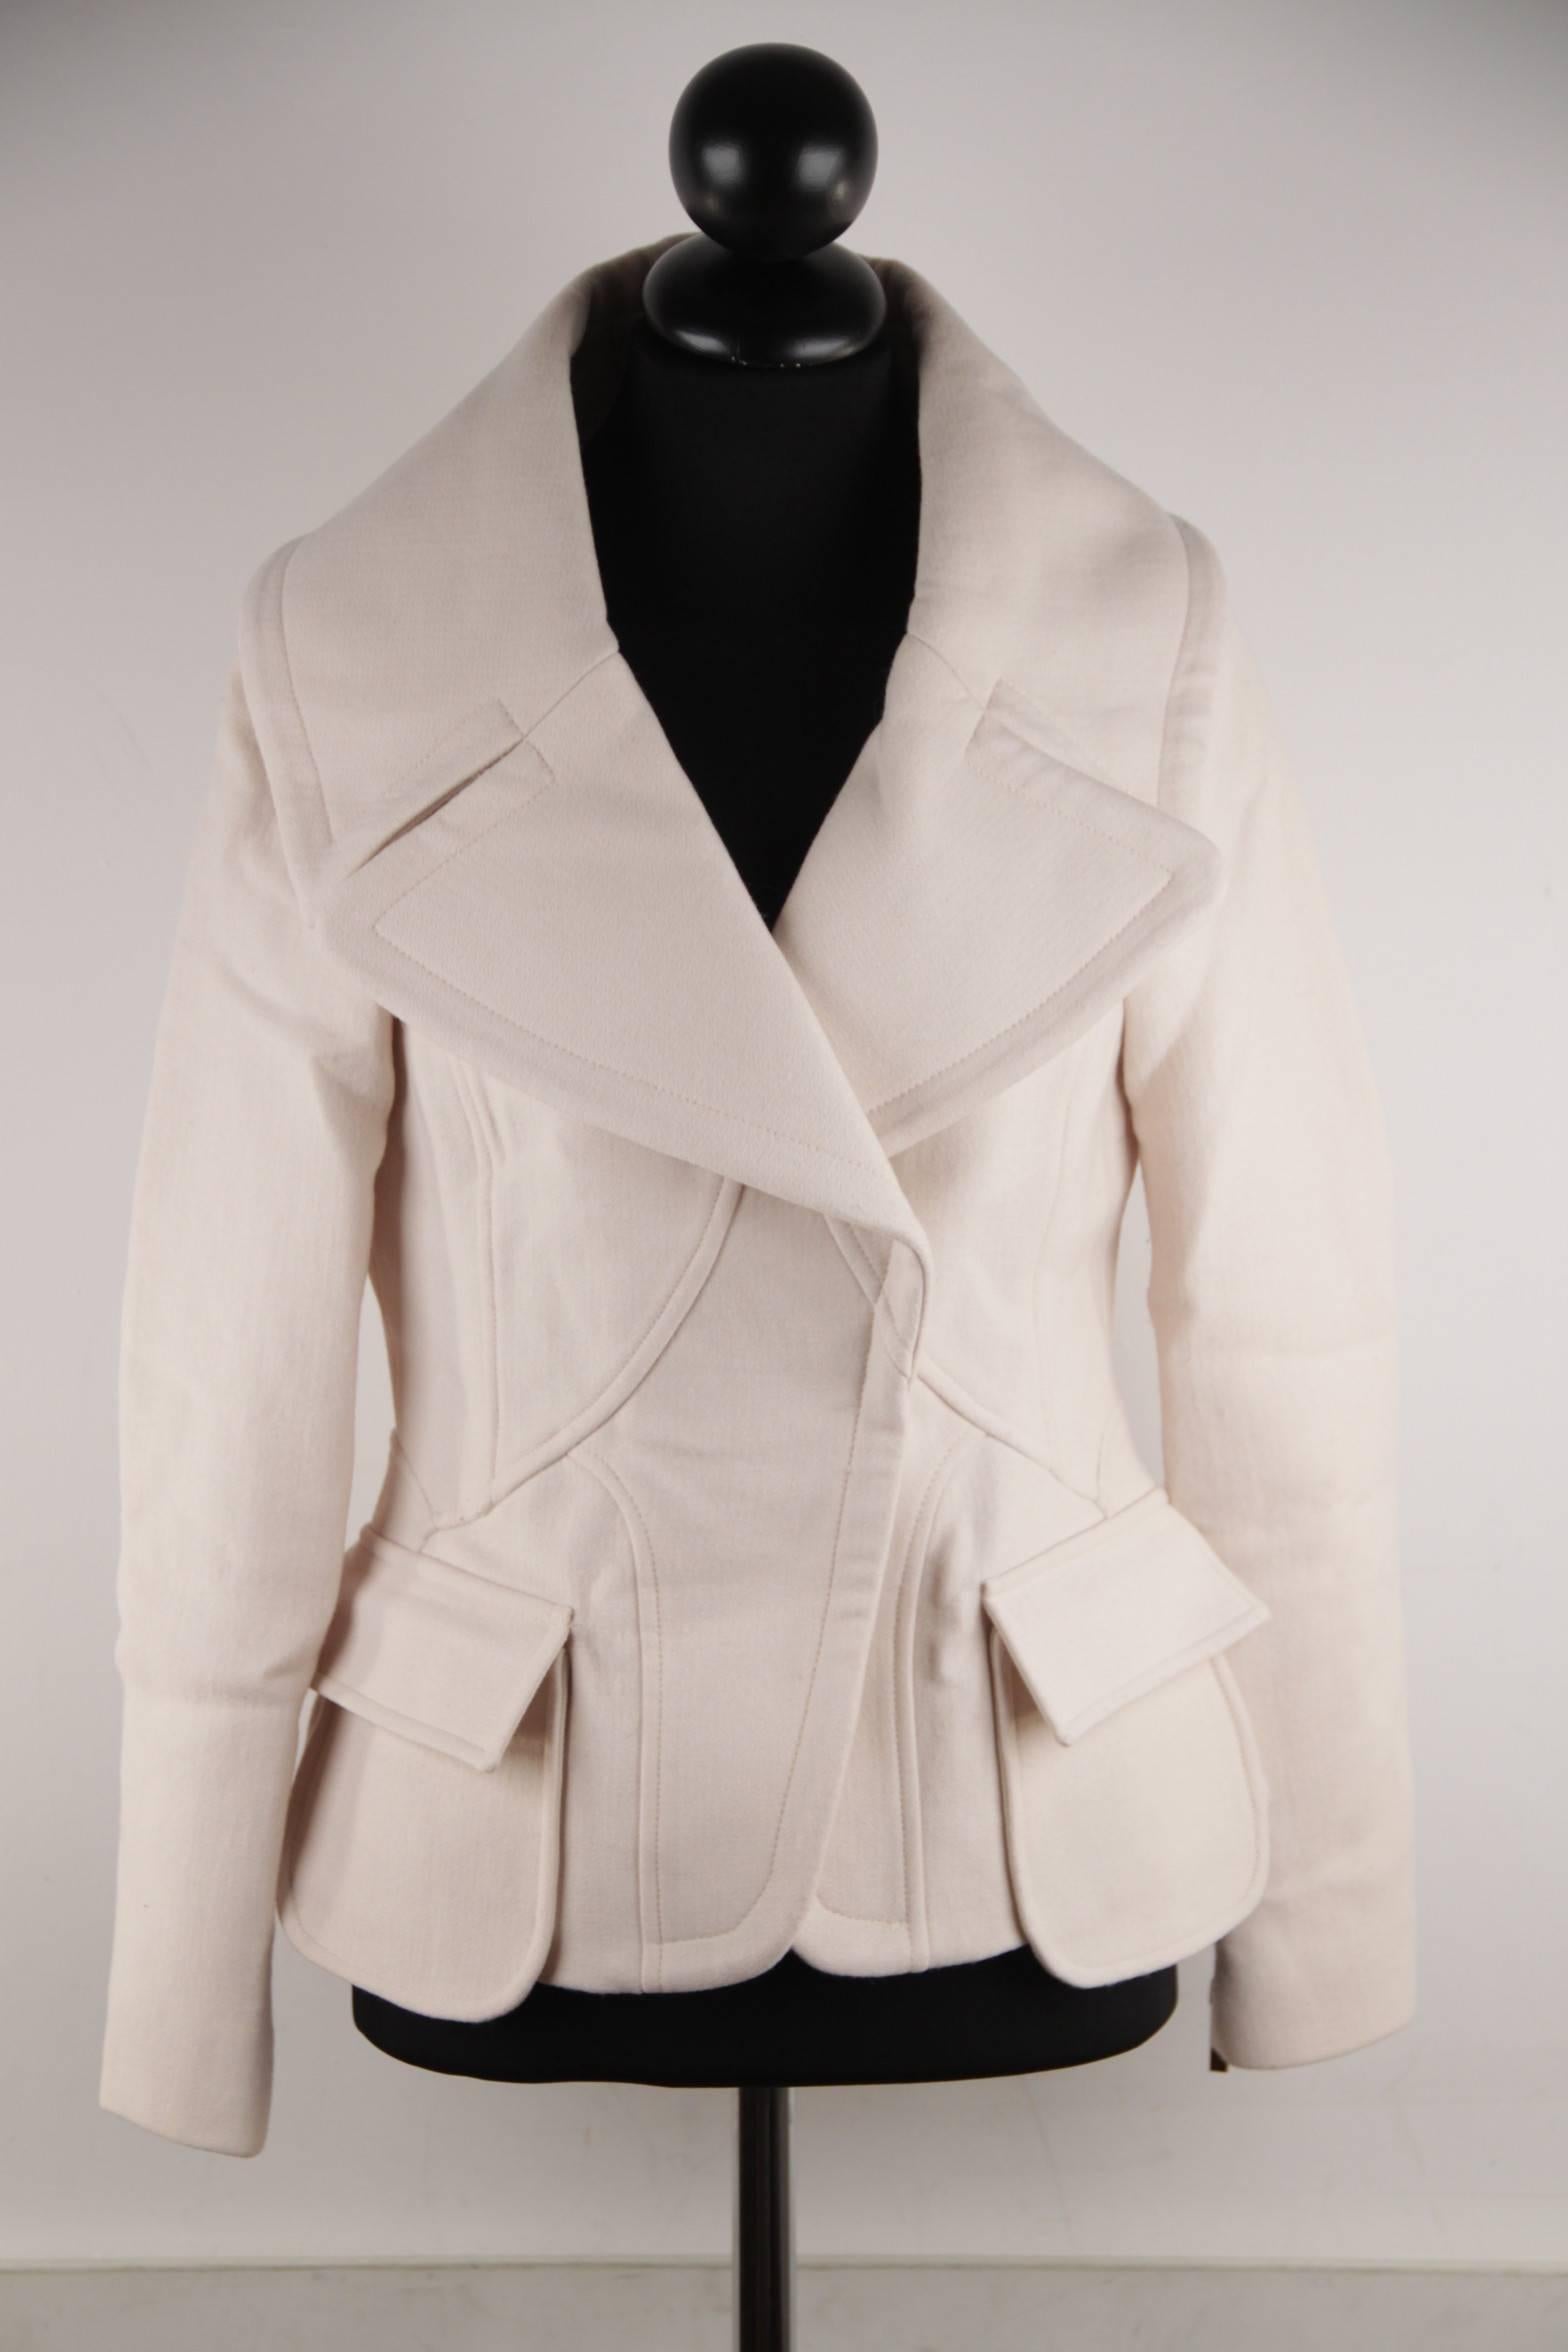  - Ivory wool jacket from the 2005 Fall Ready-to-wear collection by VERSACE
- Peacoat design
- Wide lapels
- Seam details throughout
- Dual flap pockets at waist
- Hidden snap closures at center front
- Composition: 99% Wool, 1% Elastane
-